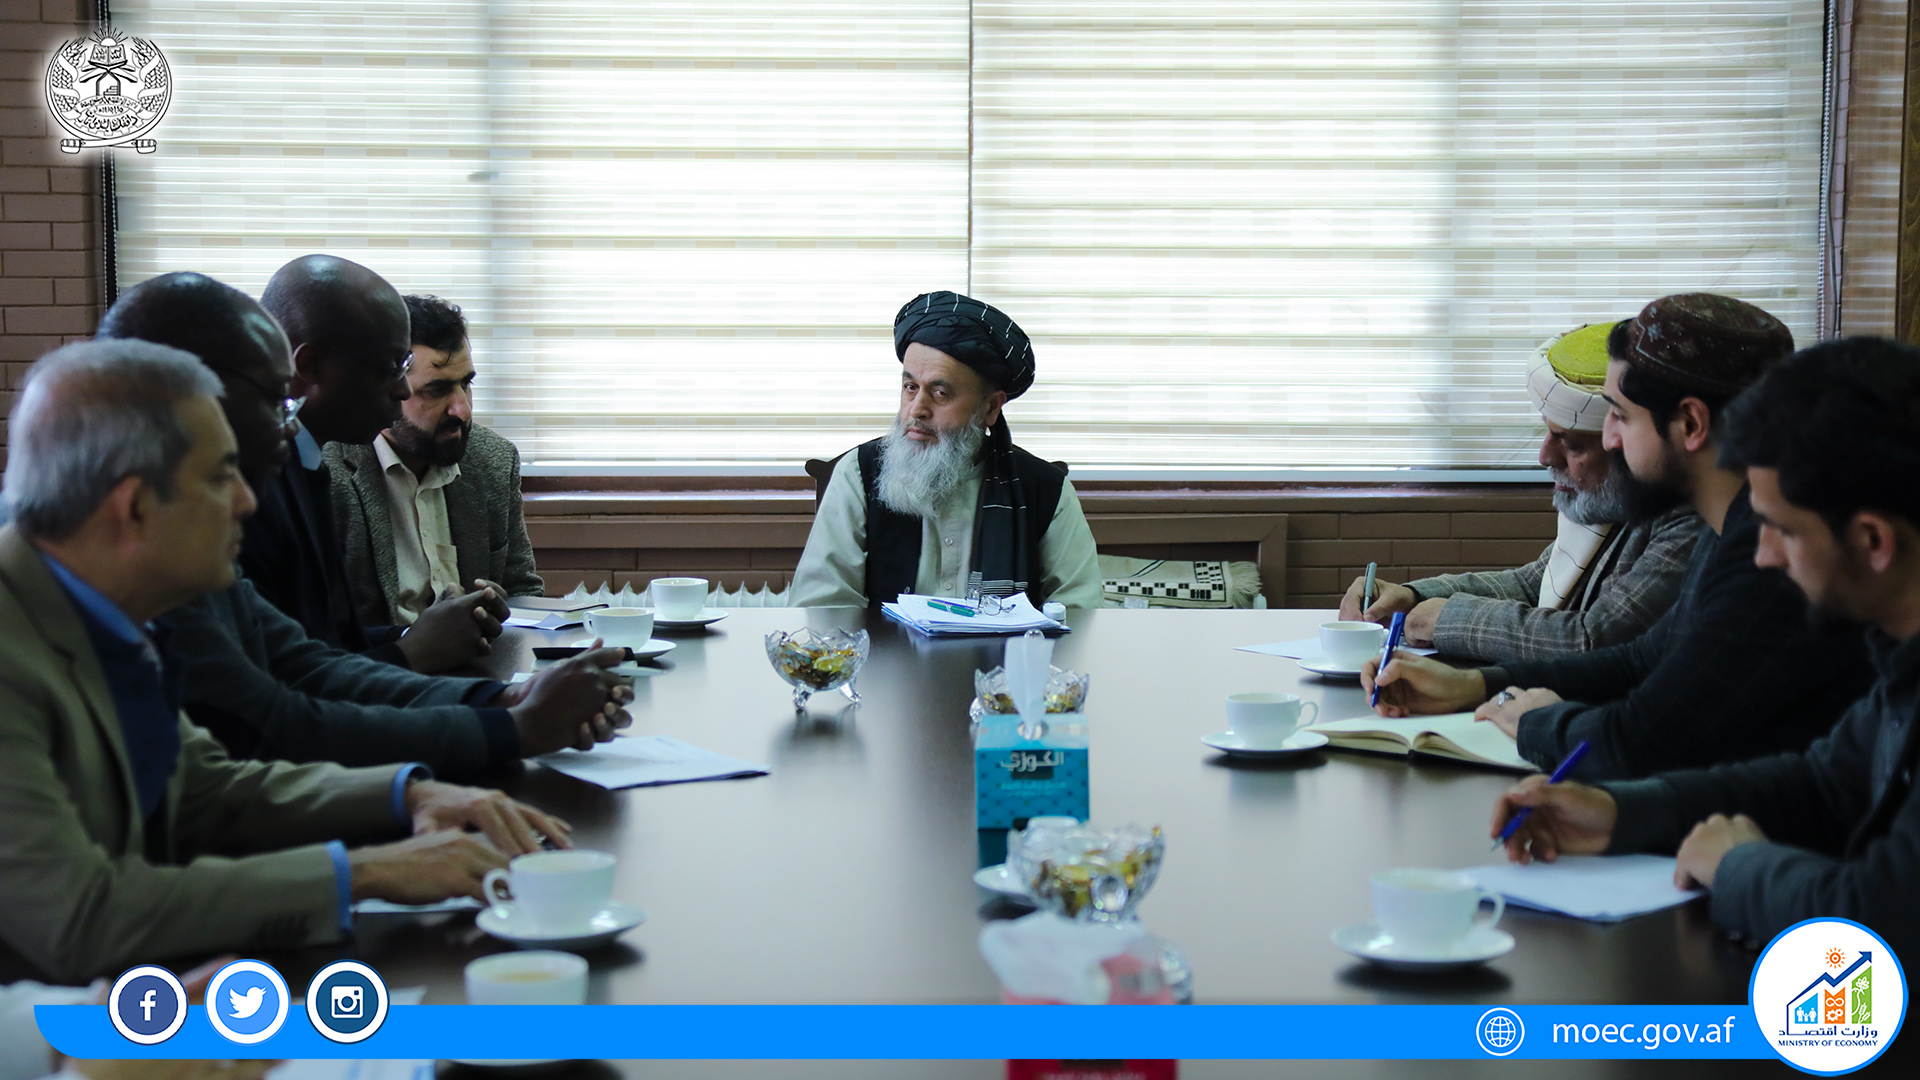 Today, Tuesday, 23/7/1444 AH, Maulvi Mohammad Alam "Jamil", Deputy Finance, Administration and Coordination of the Ministry of Economy met Rauf Majho, Deputy Commissioner of UNHCR and his accompanying team.